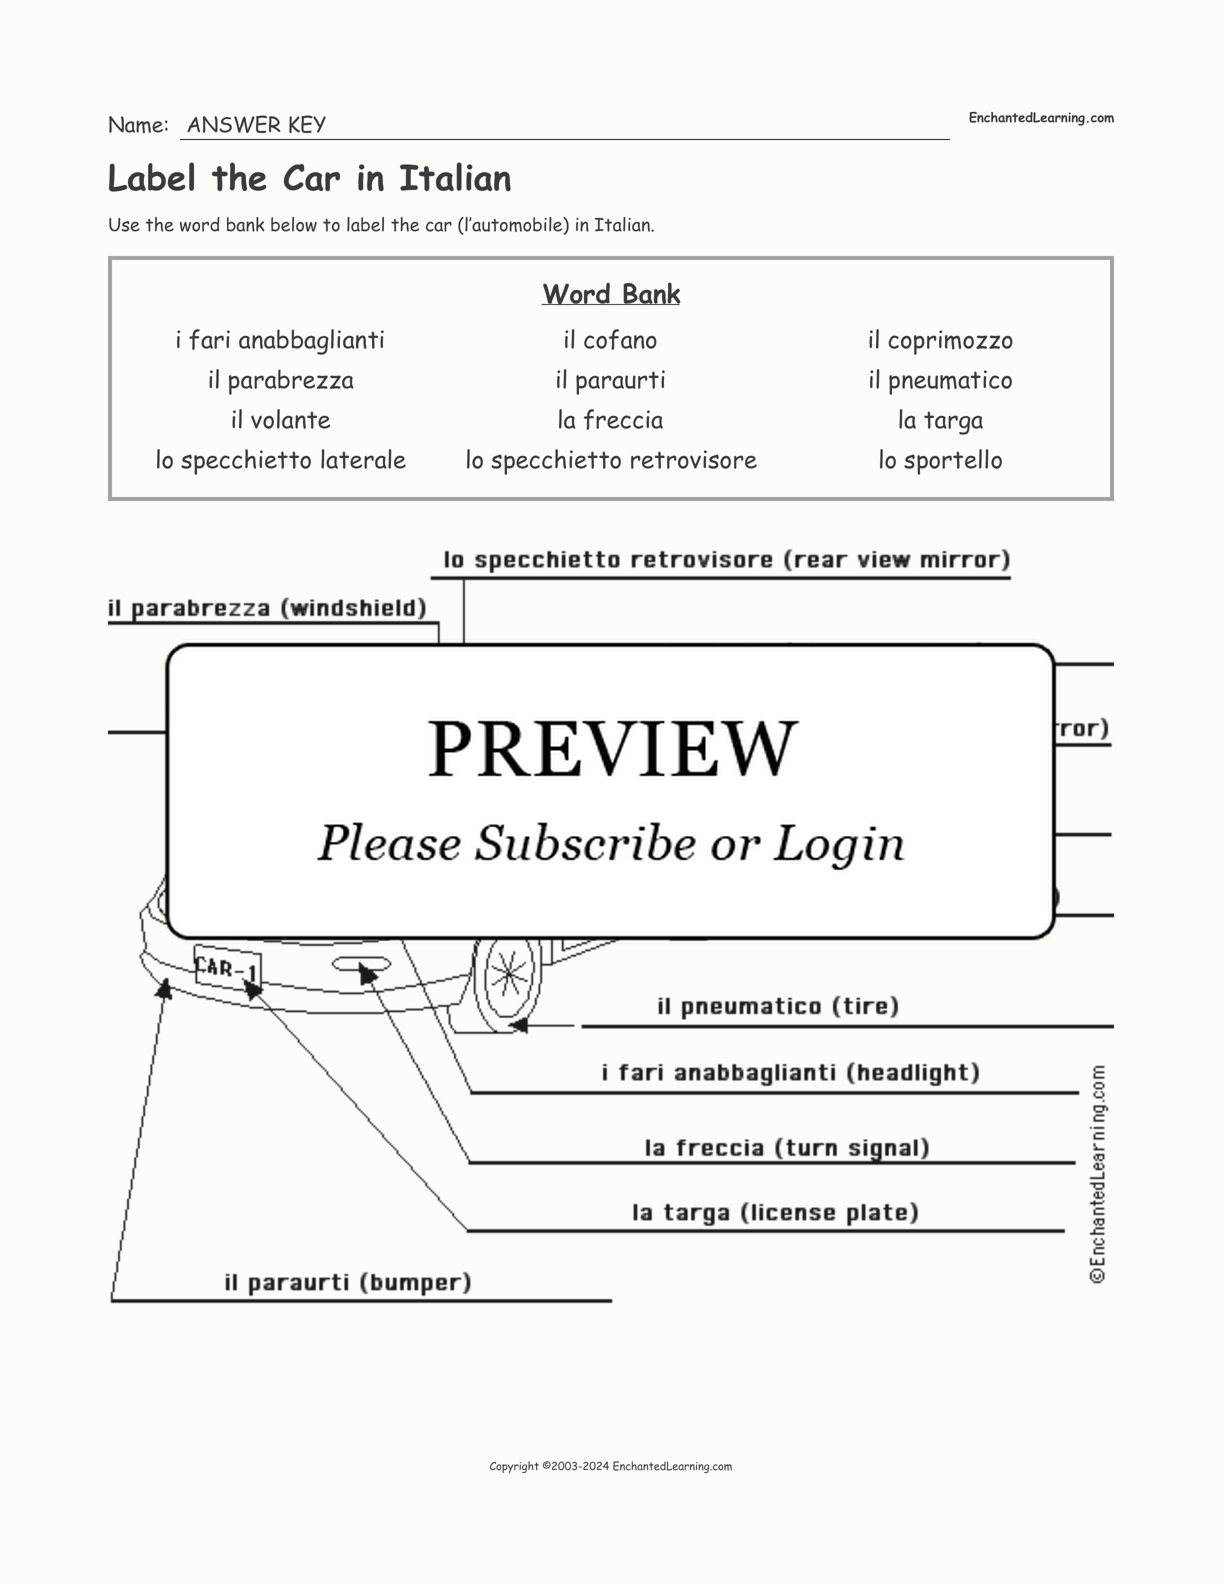 Label the Car in Italian interactive worksheet page 2